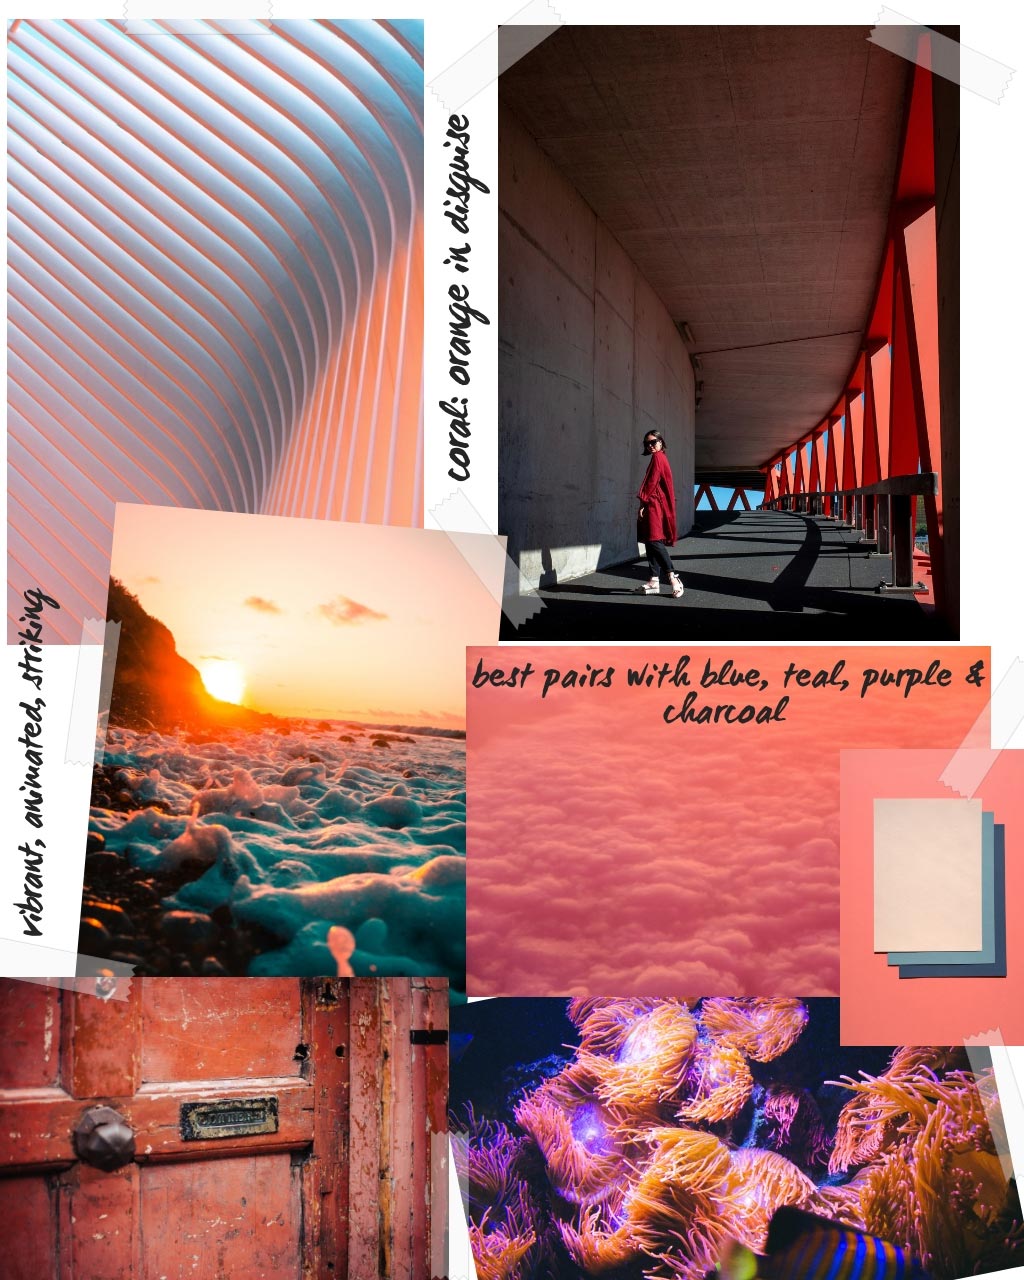 A collage of images inspired by Pantone's announcement of Living Coral as the Color of the Year 2019.